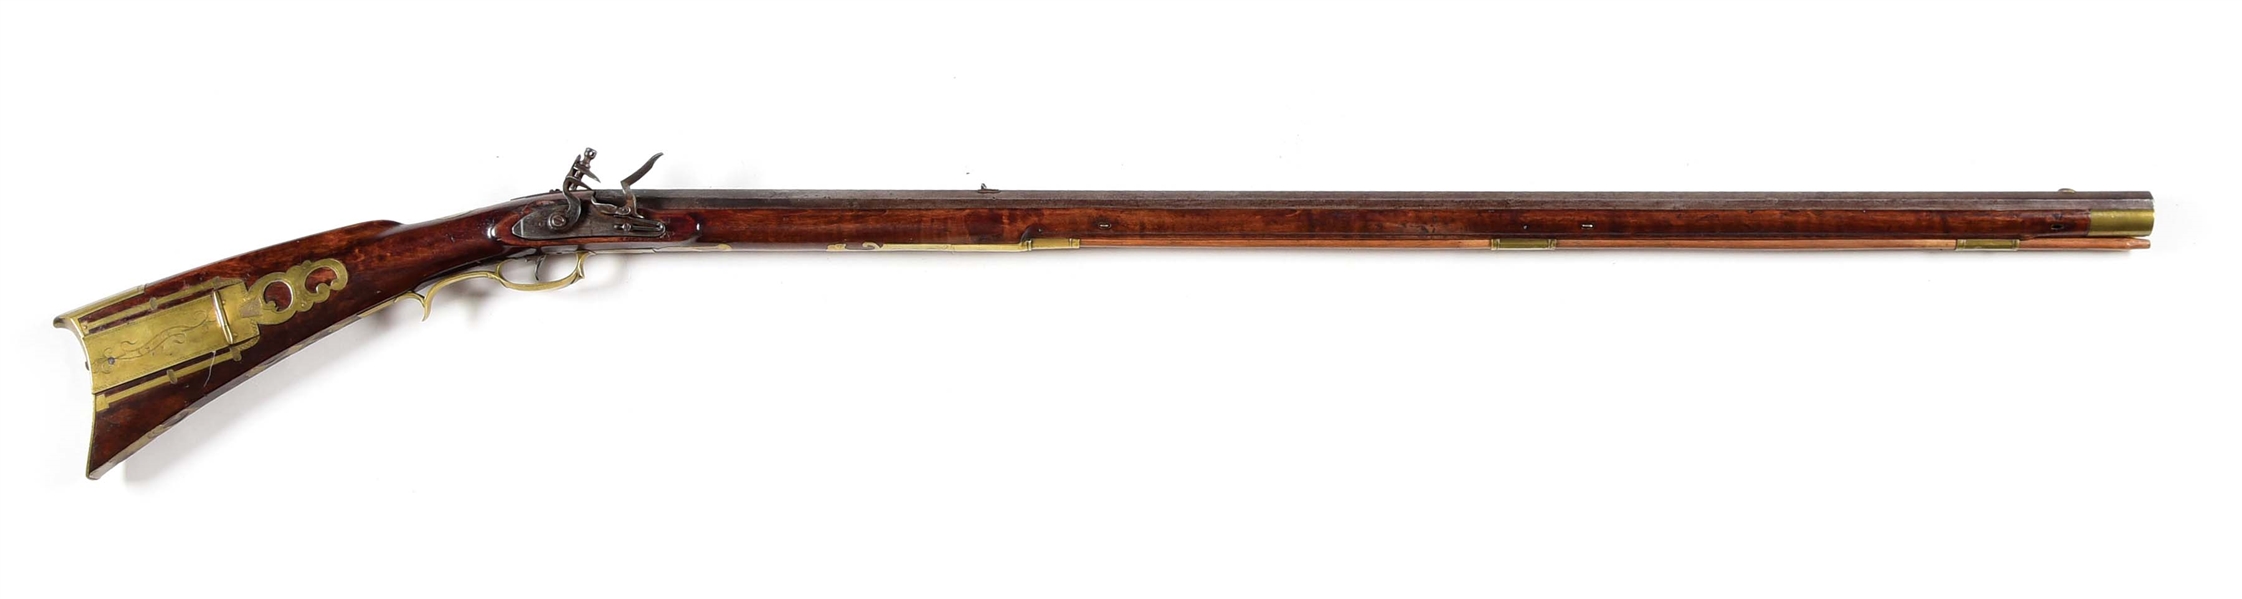 (A) FINE FLINTLOCK KENTUCKY RIFLE ATTRIBUTED TO JACOB GEORGE.